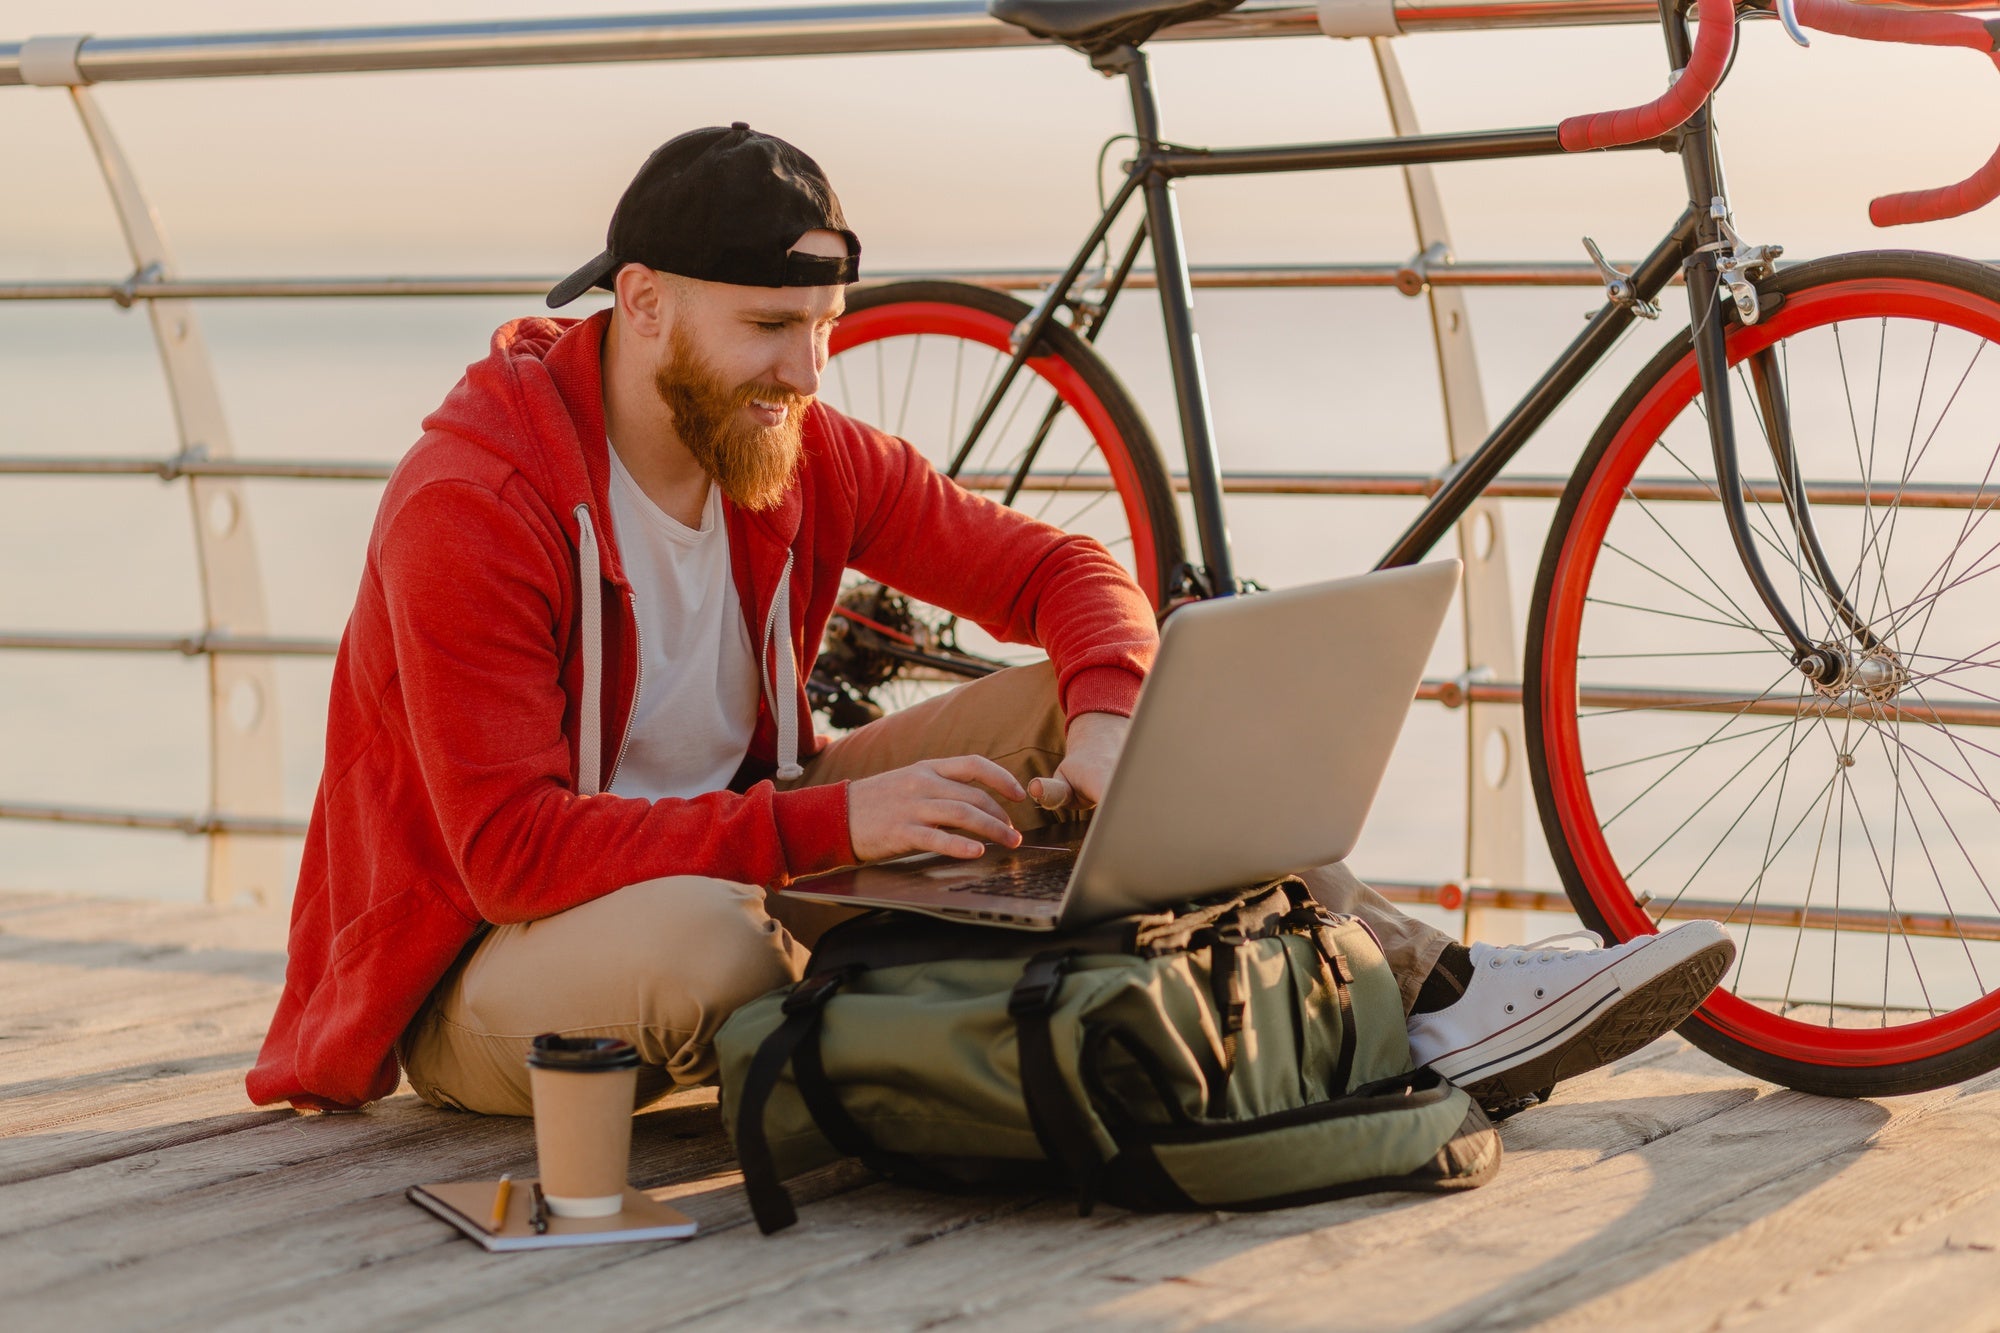 The Challenges of Being a Digital Nomad